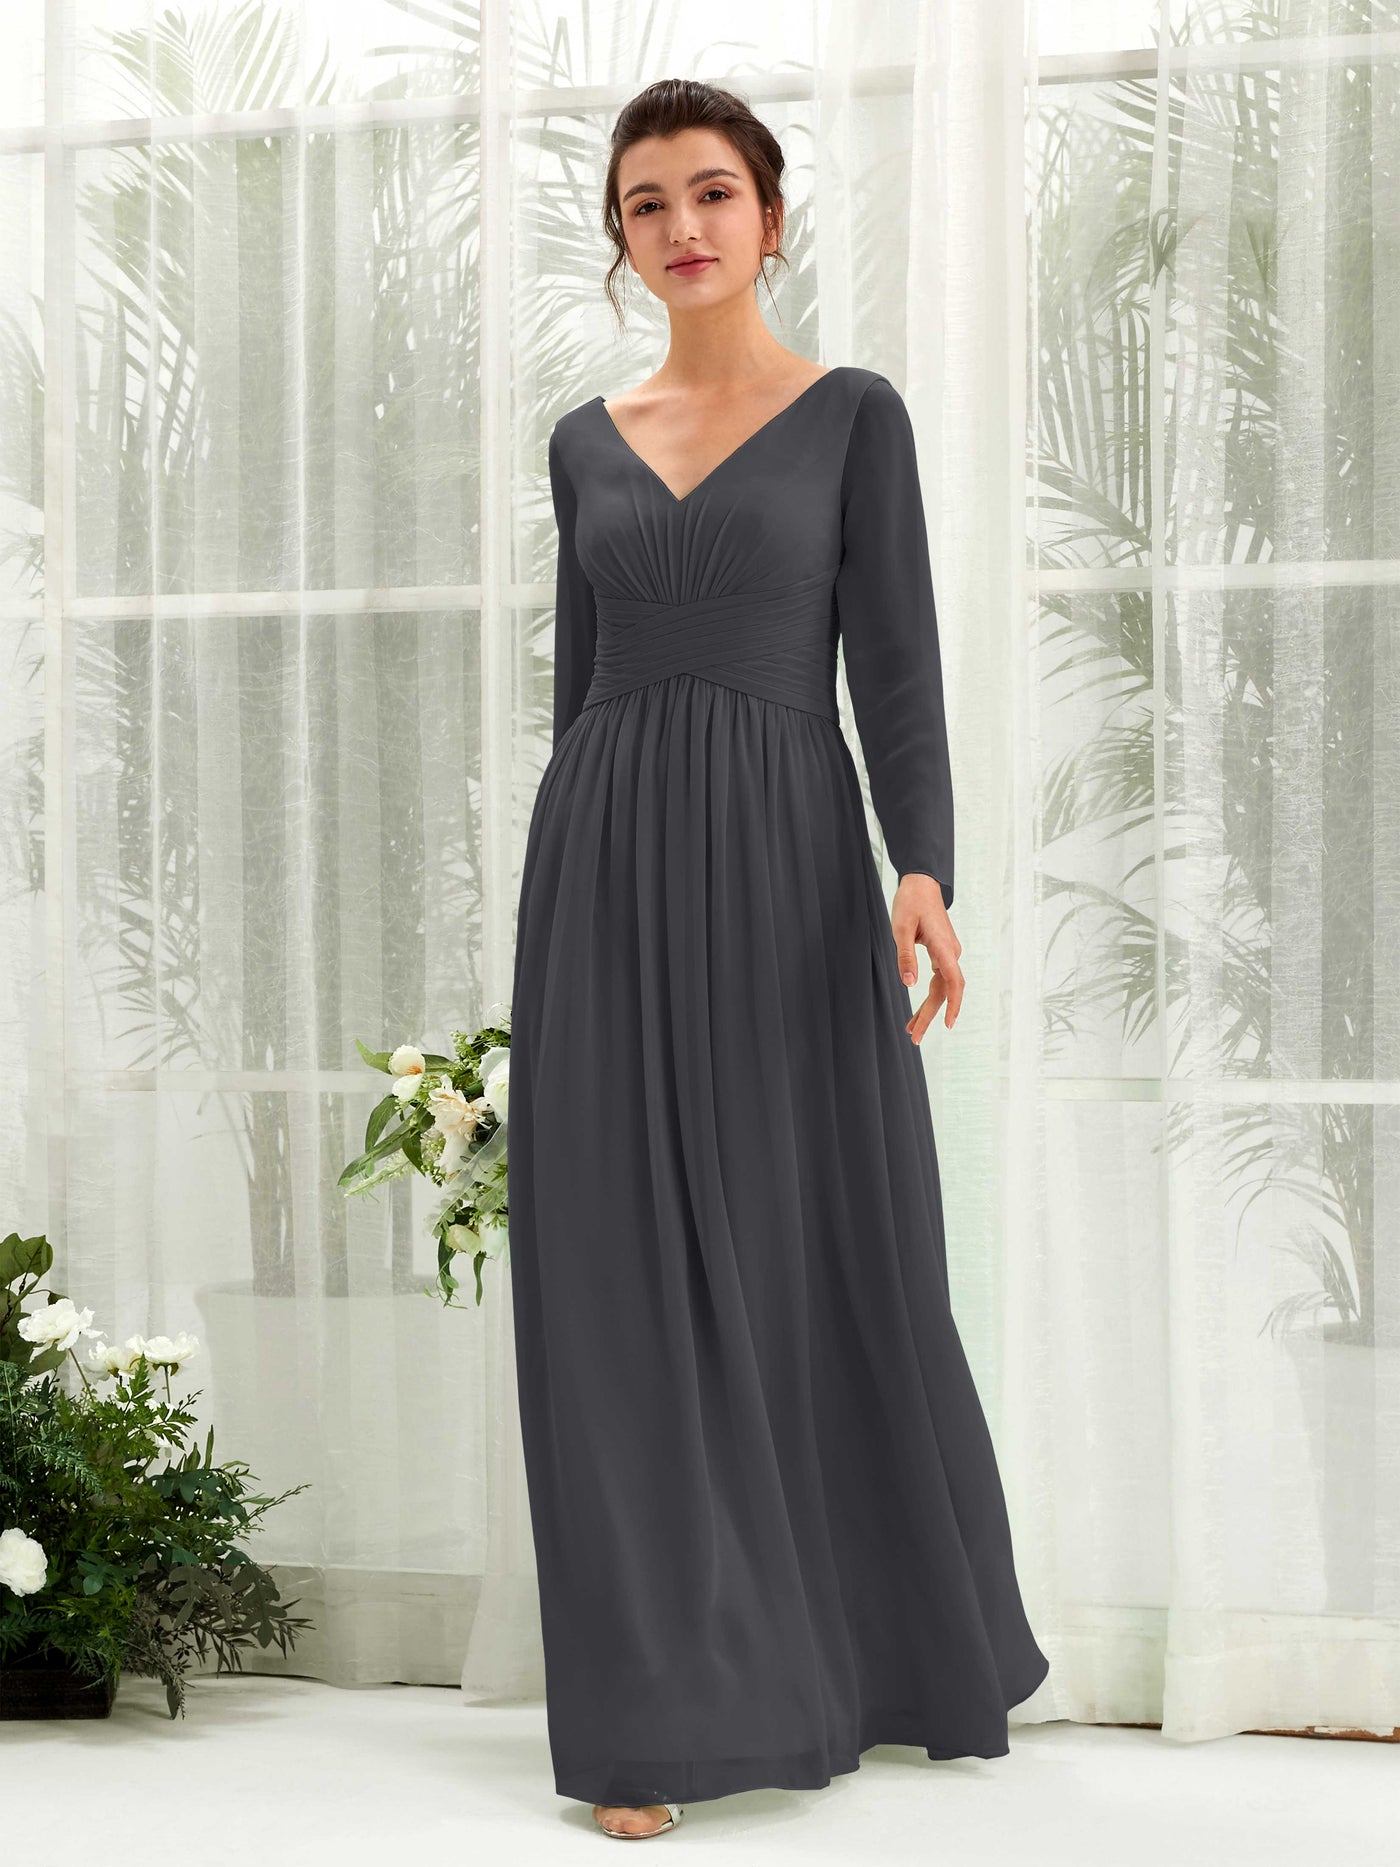 Pewter Bridesmaid Dresses Bridesmaid Dress A-line Chiffon V-neck Full Length Long Sleeves Wedding Party Dress (81220338)#color_pewter